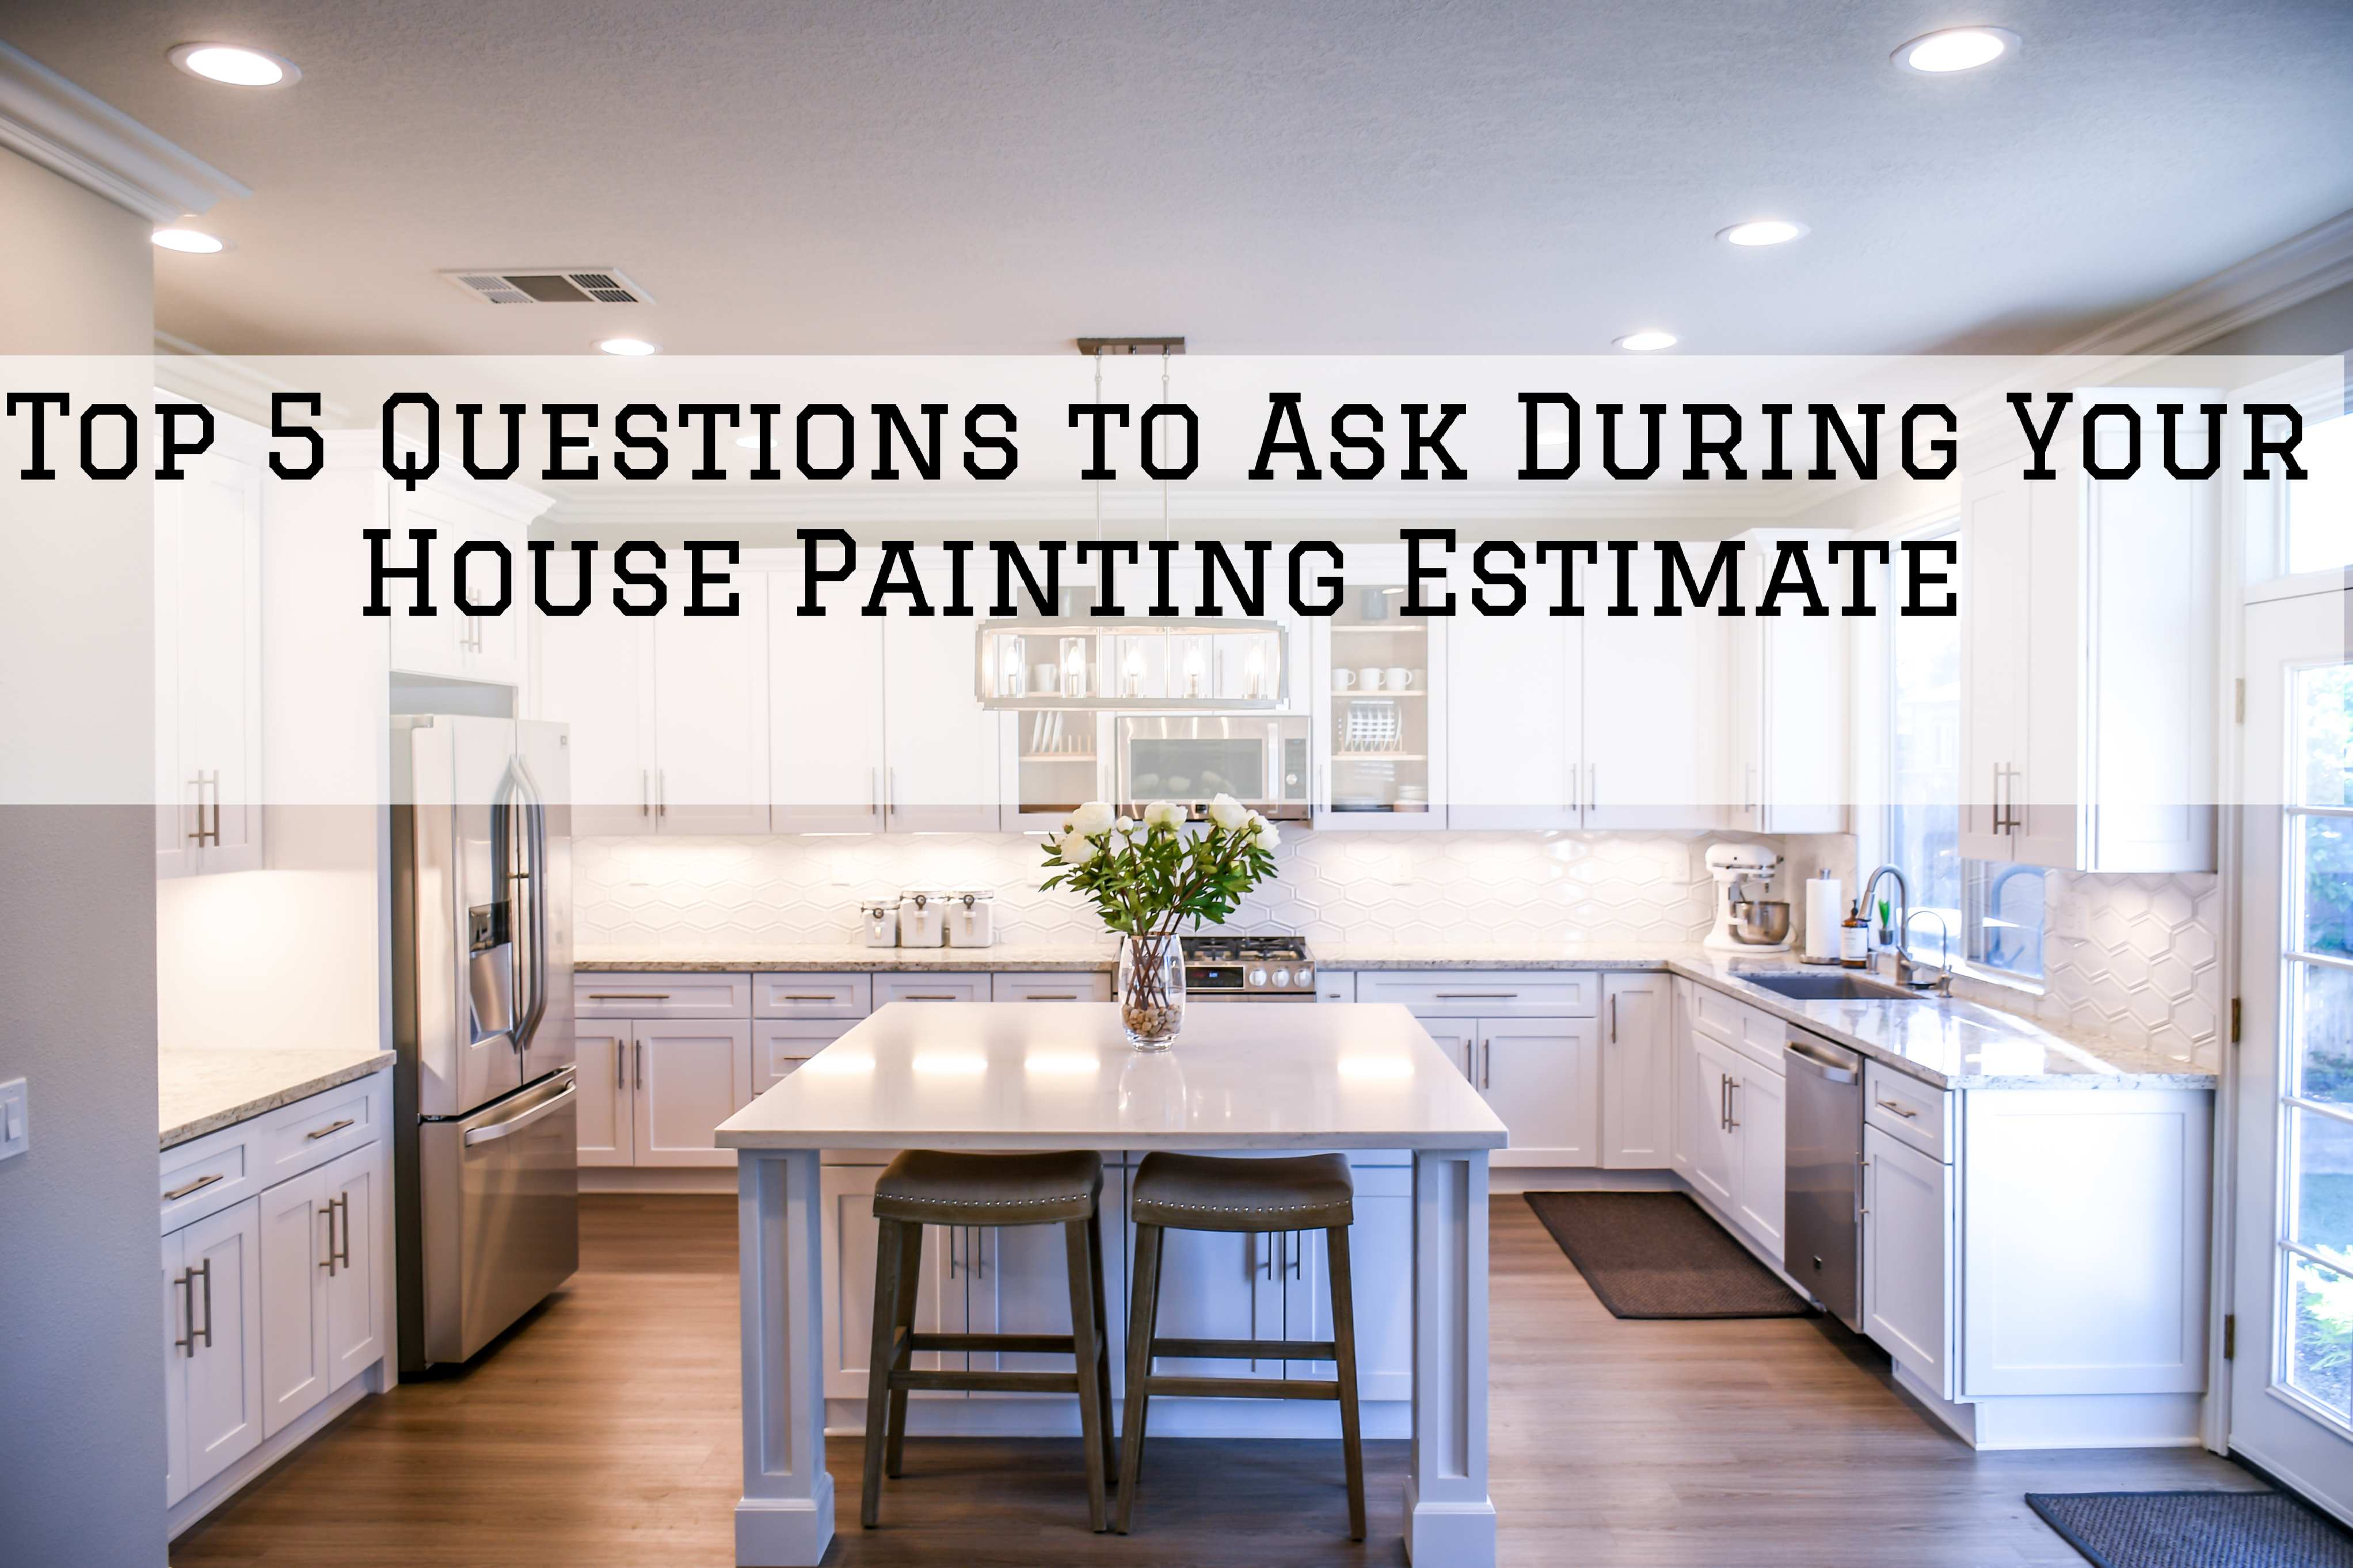 Top 5 Questions to Ask During Your House Painting Estimate in Ottawa, Ontario